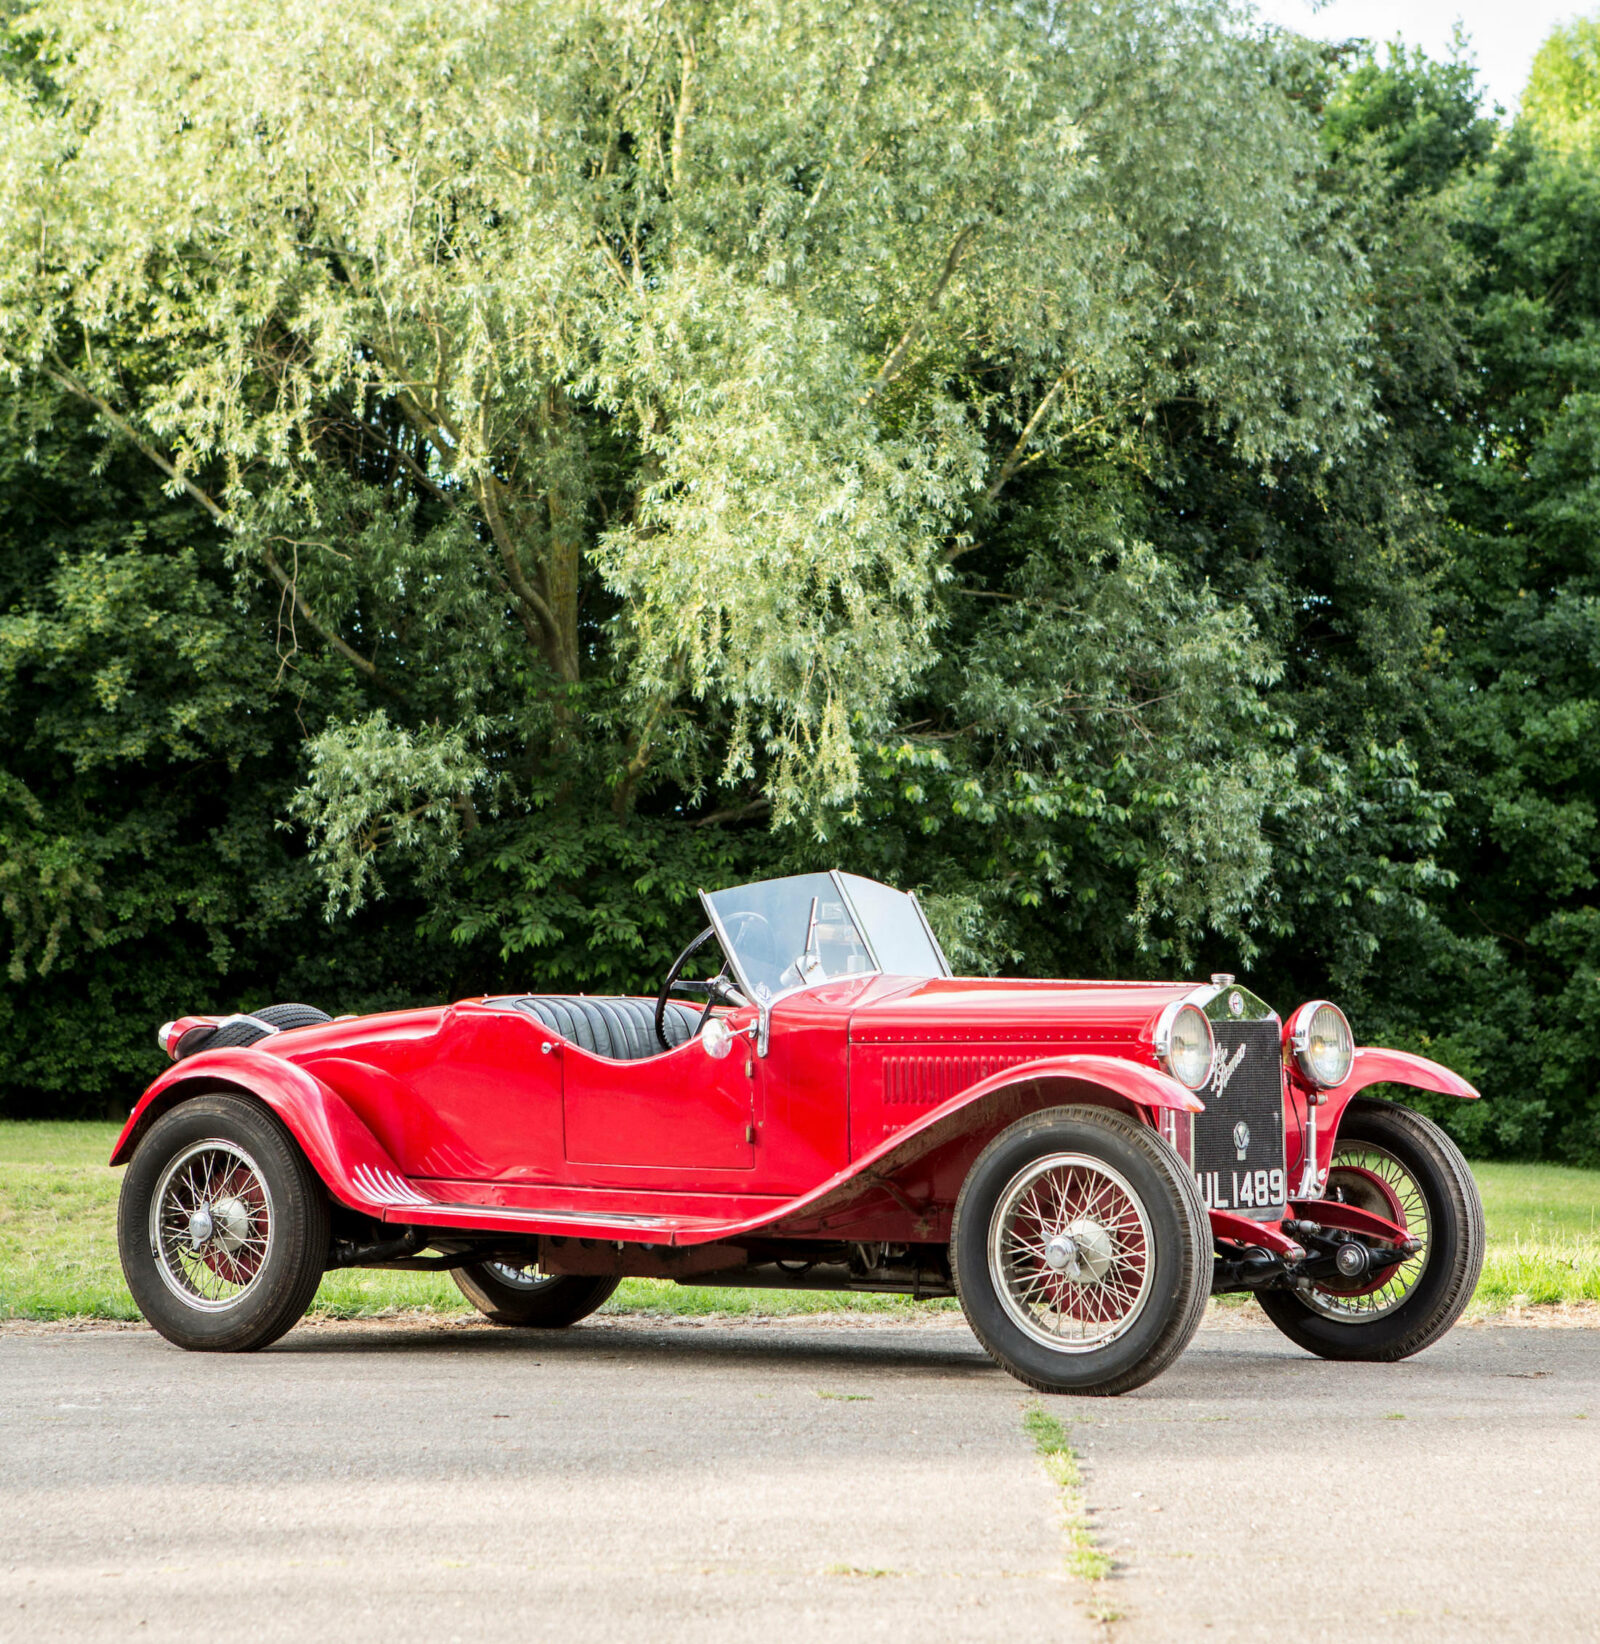 Project Car For Sale: An Impossibly Beautiful Alfa Romeo 6C 2500